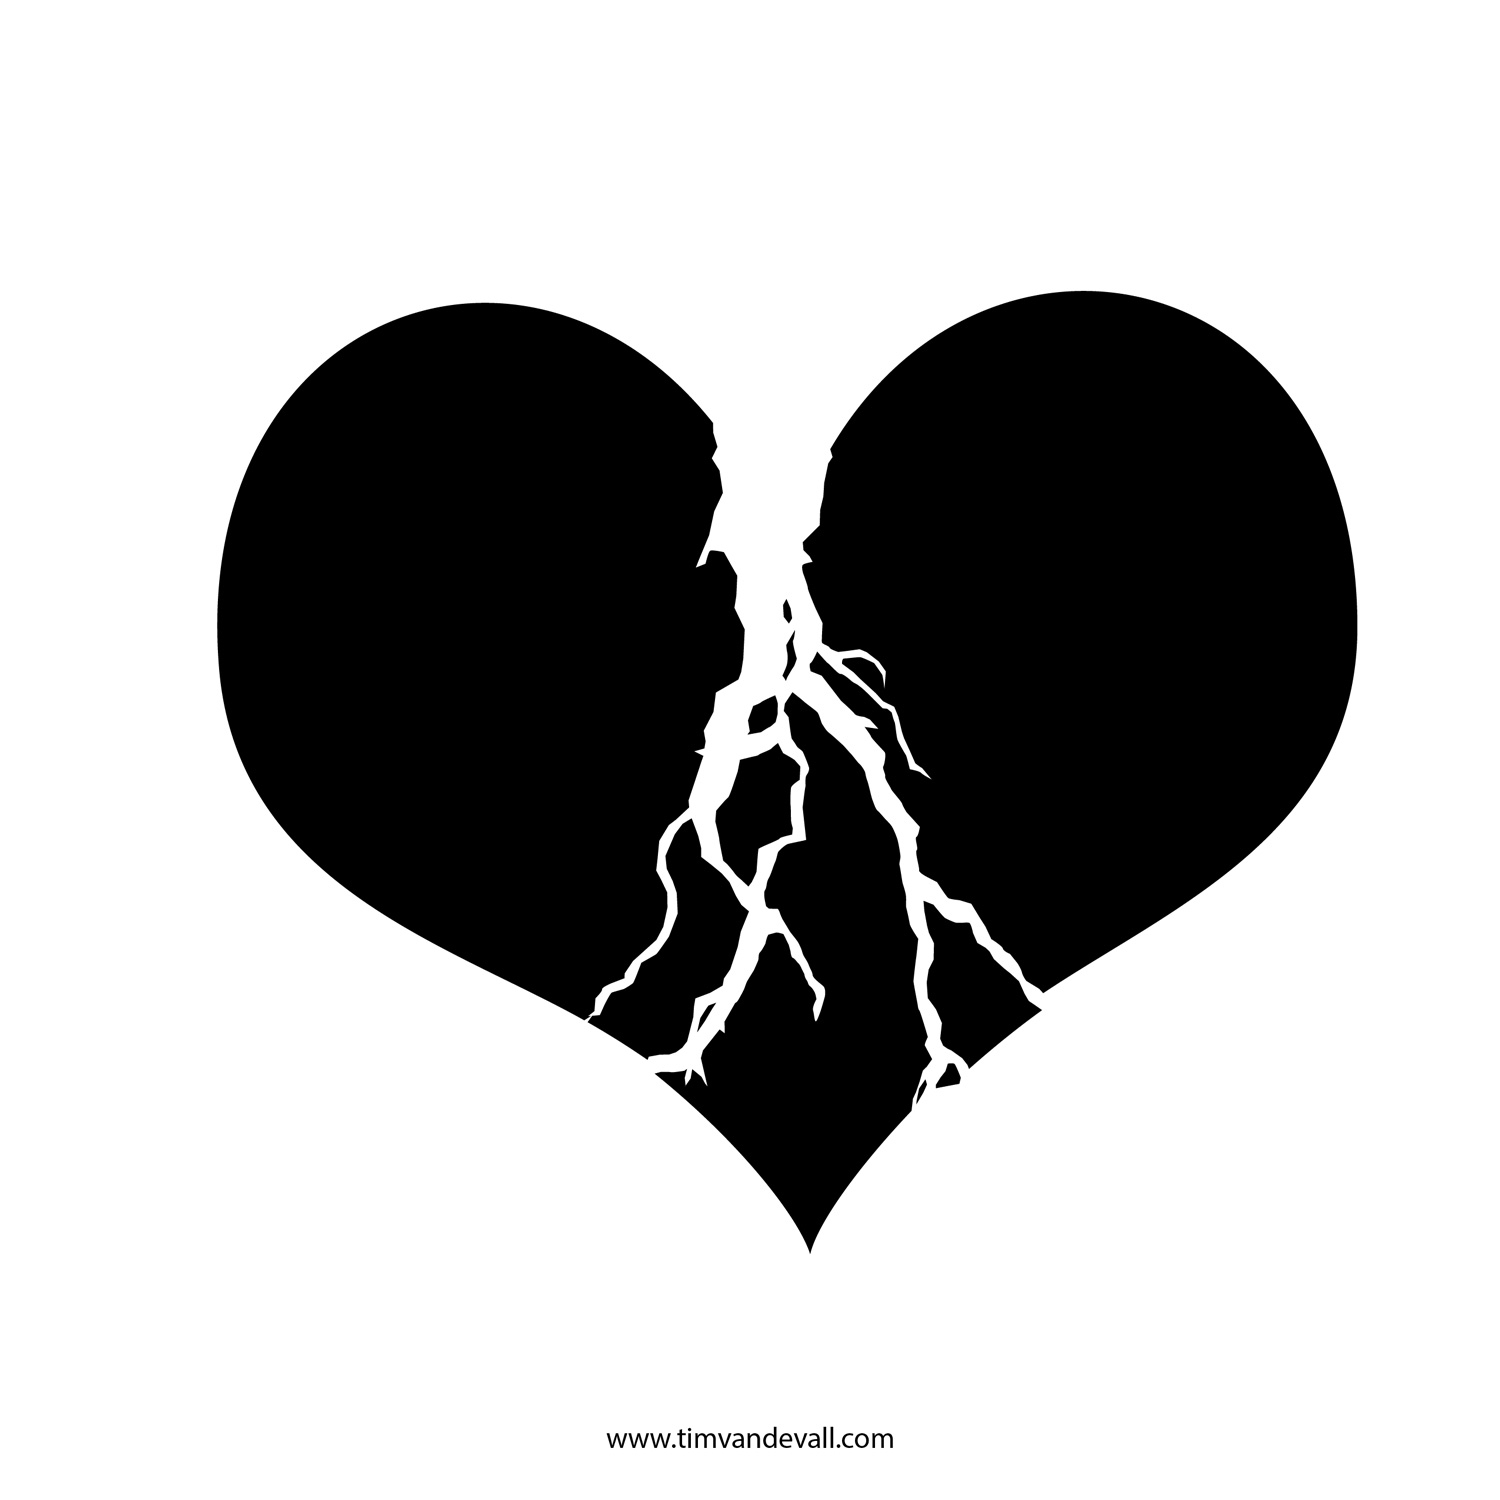 Awesome collection digital m. Black clipart broken heart